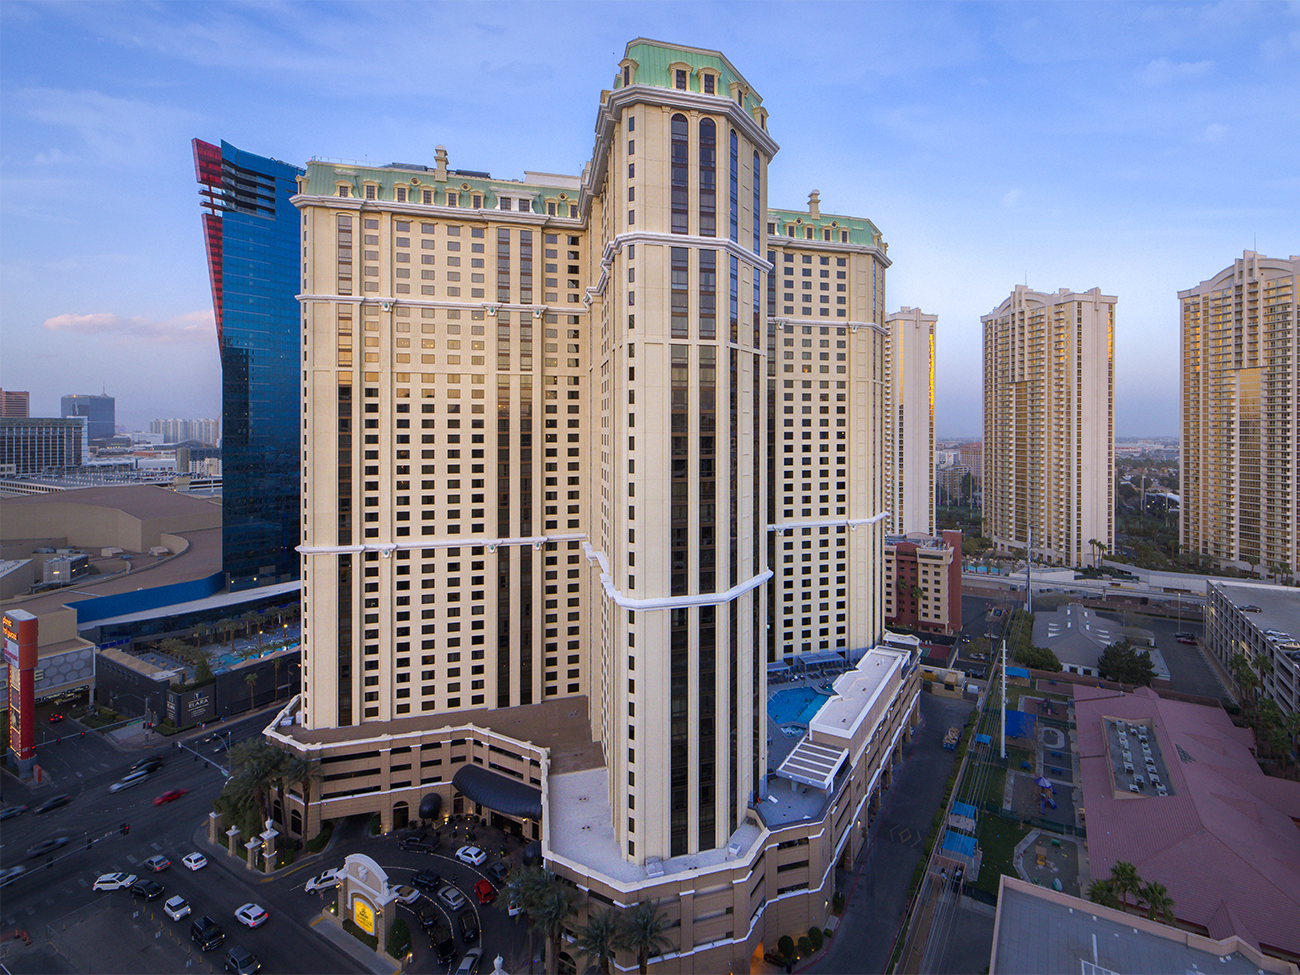 Image of Marriott's Grand Chateau® in Las Vegas.